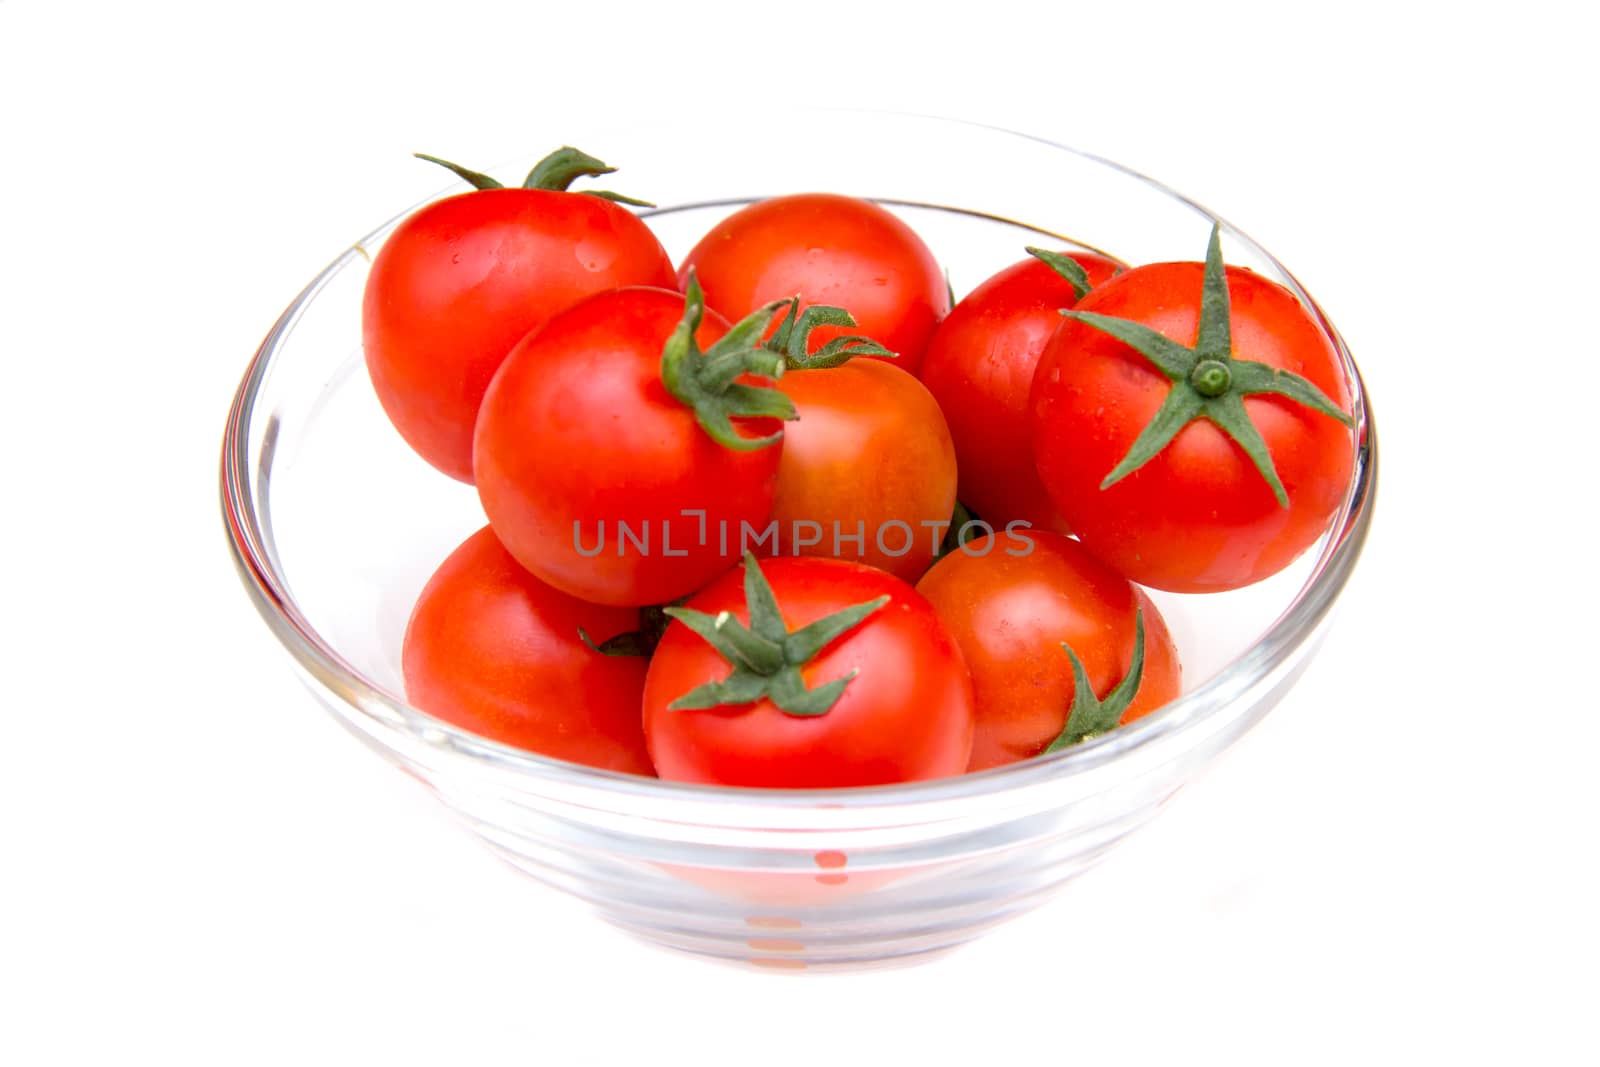 Tomato on bowl by spafra